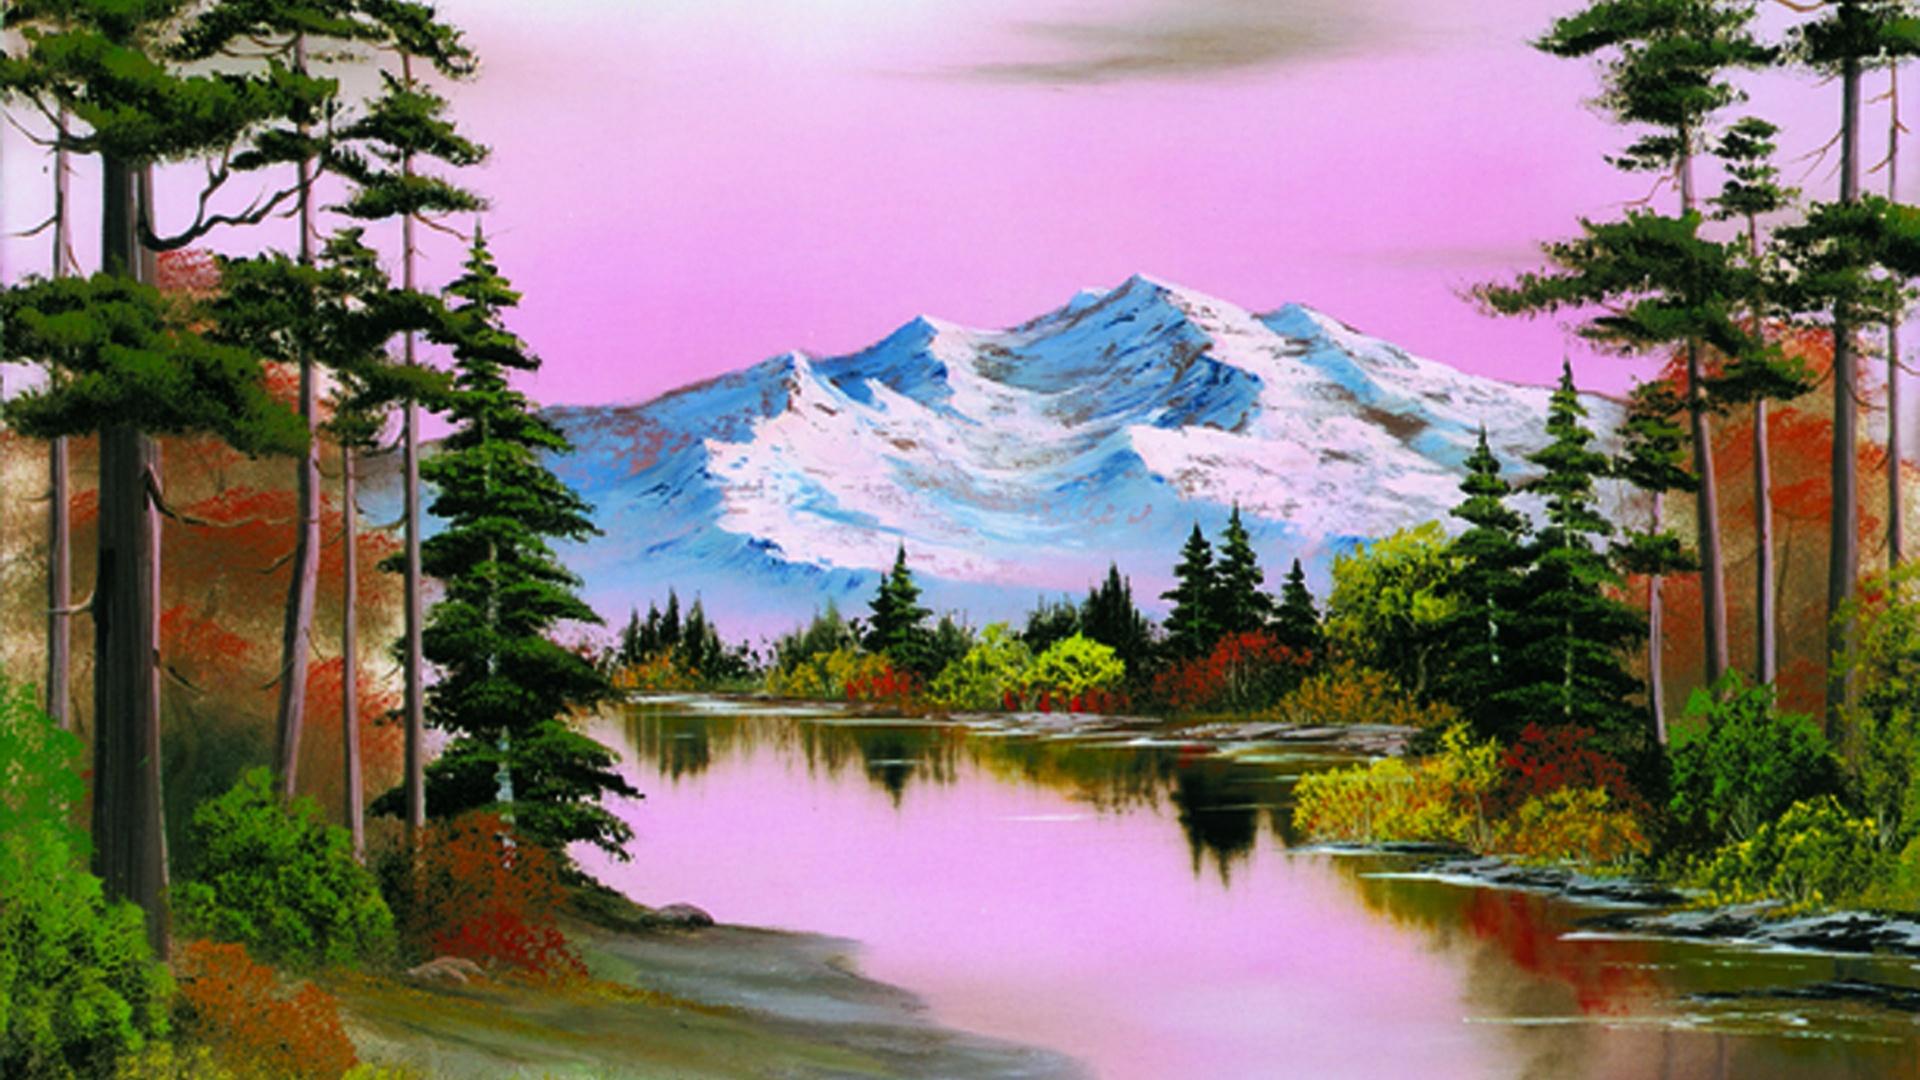 The Best Of Joy Painting Autumn Fantasy Kcts